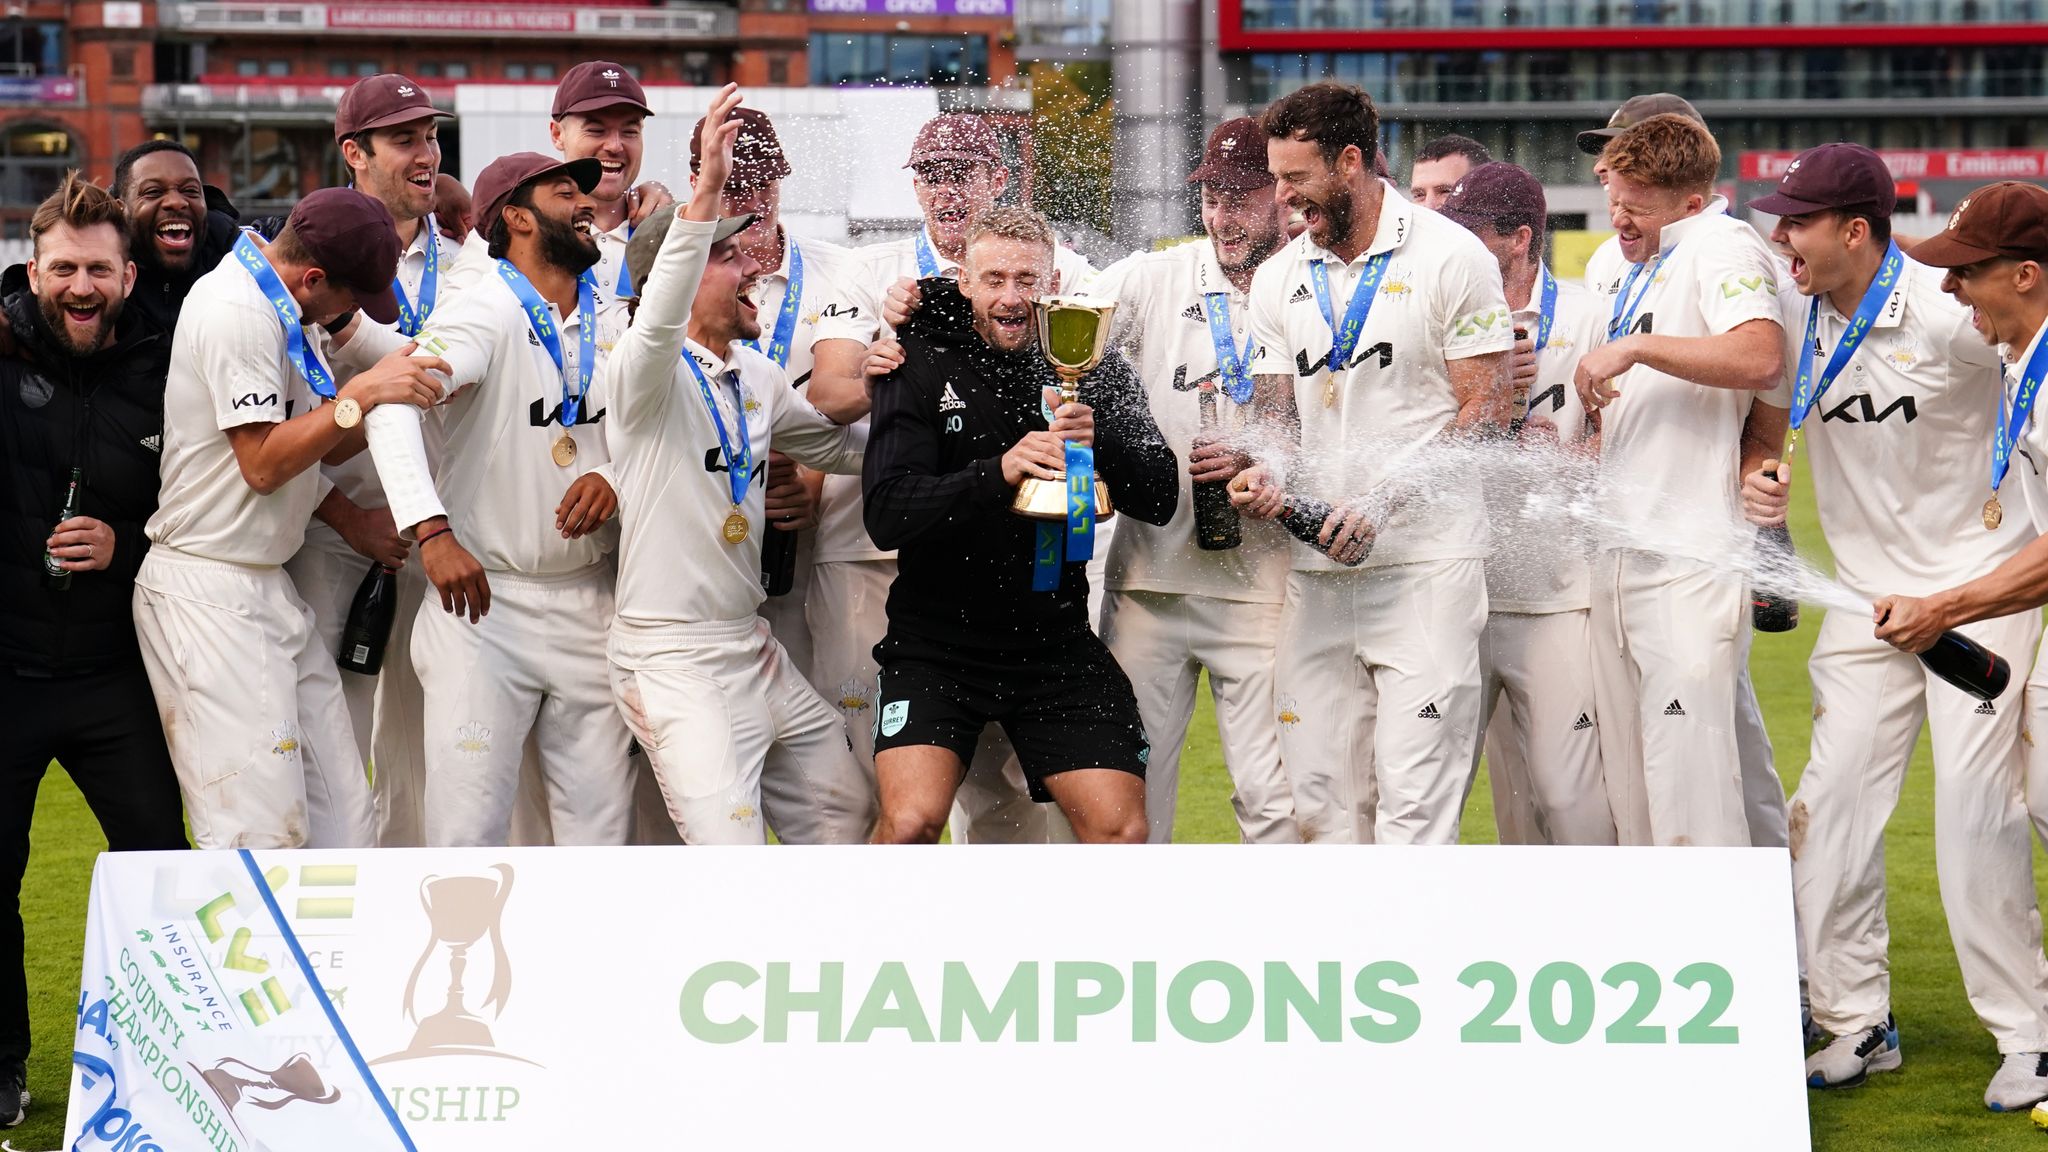 LV= County Championship 2023 fixtures all the matches in next year's